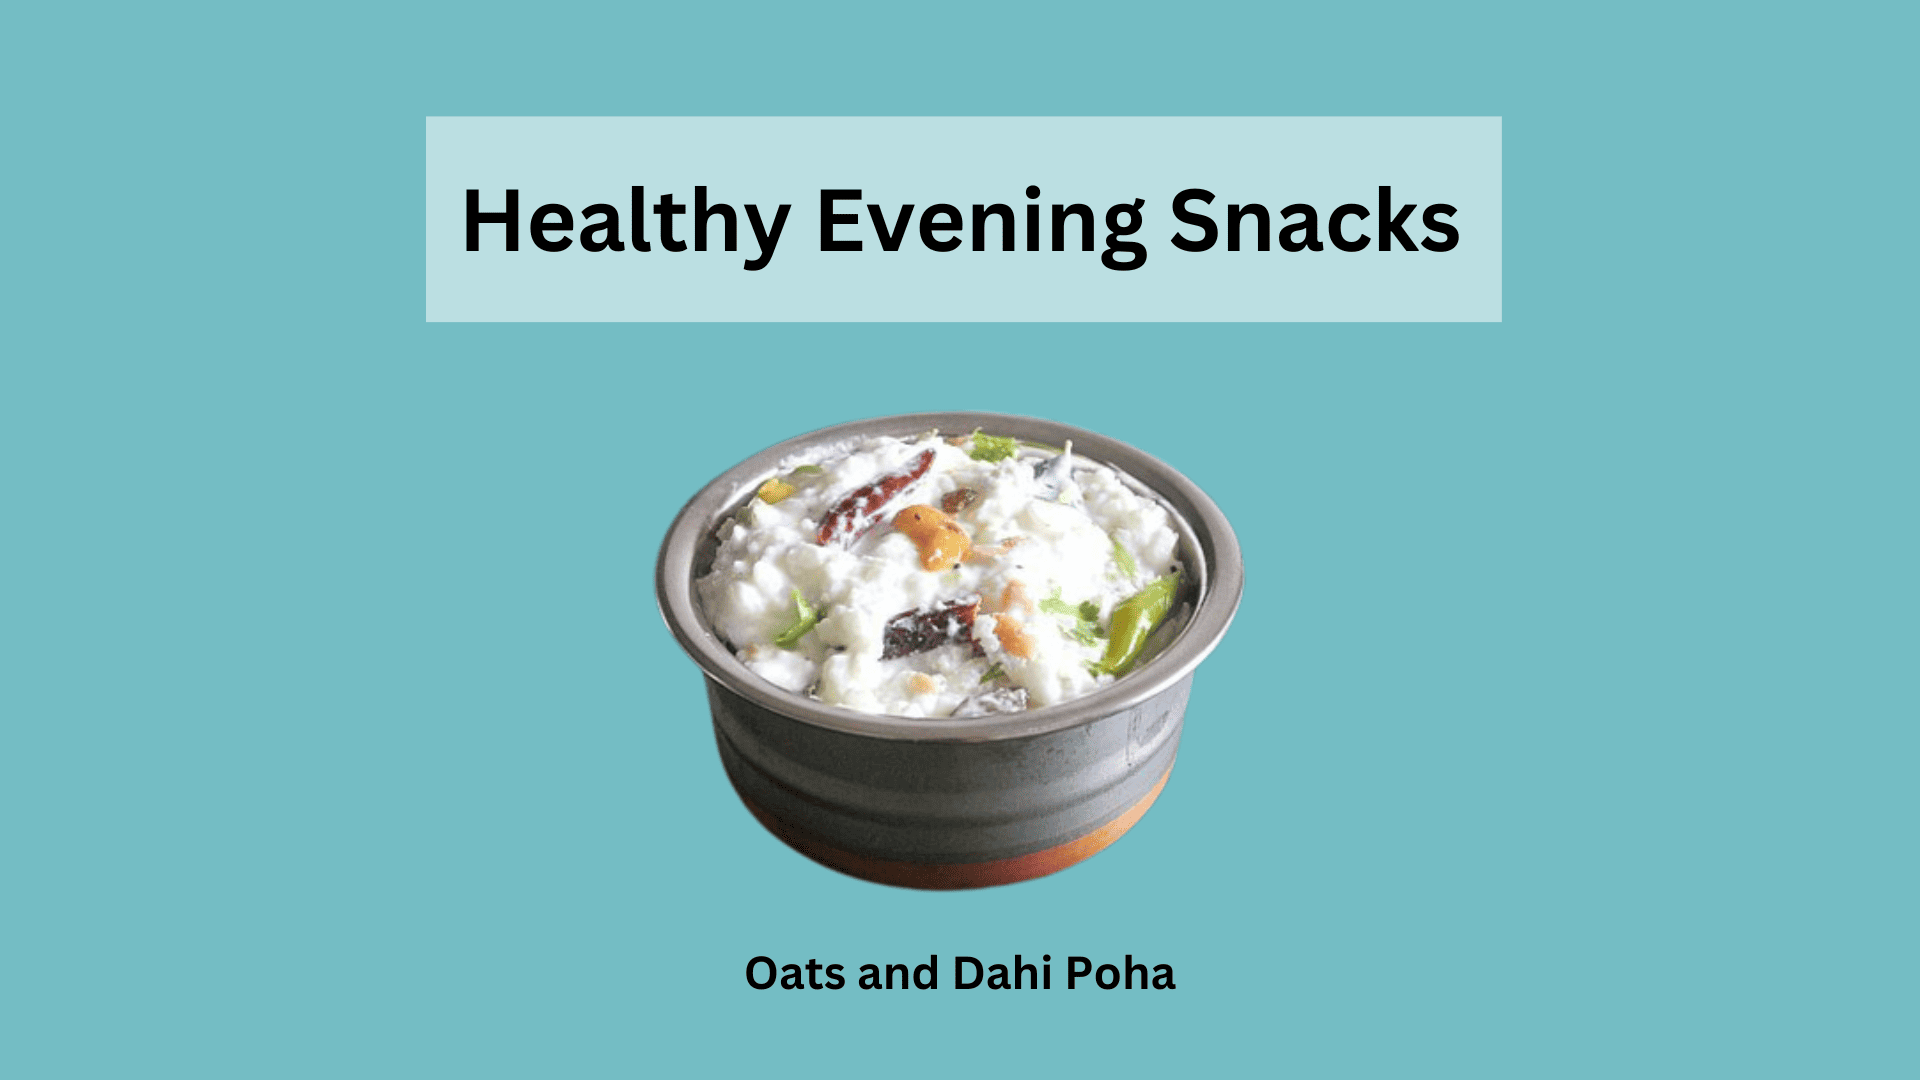 50 Healthy Indian Snack Ideas : Munching on Healthy Snacks